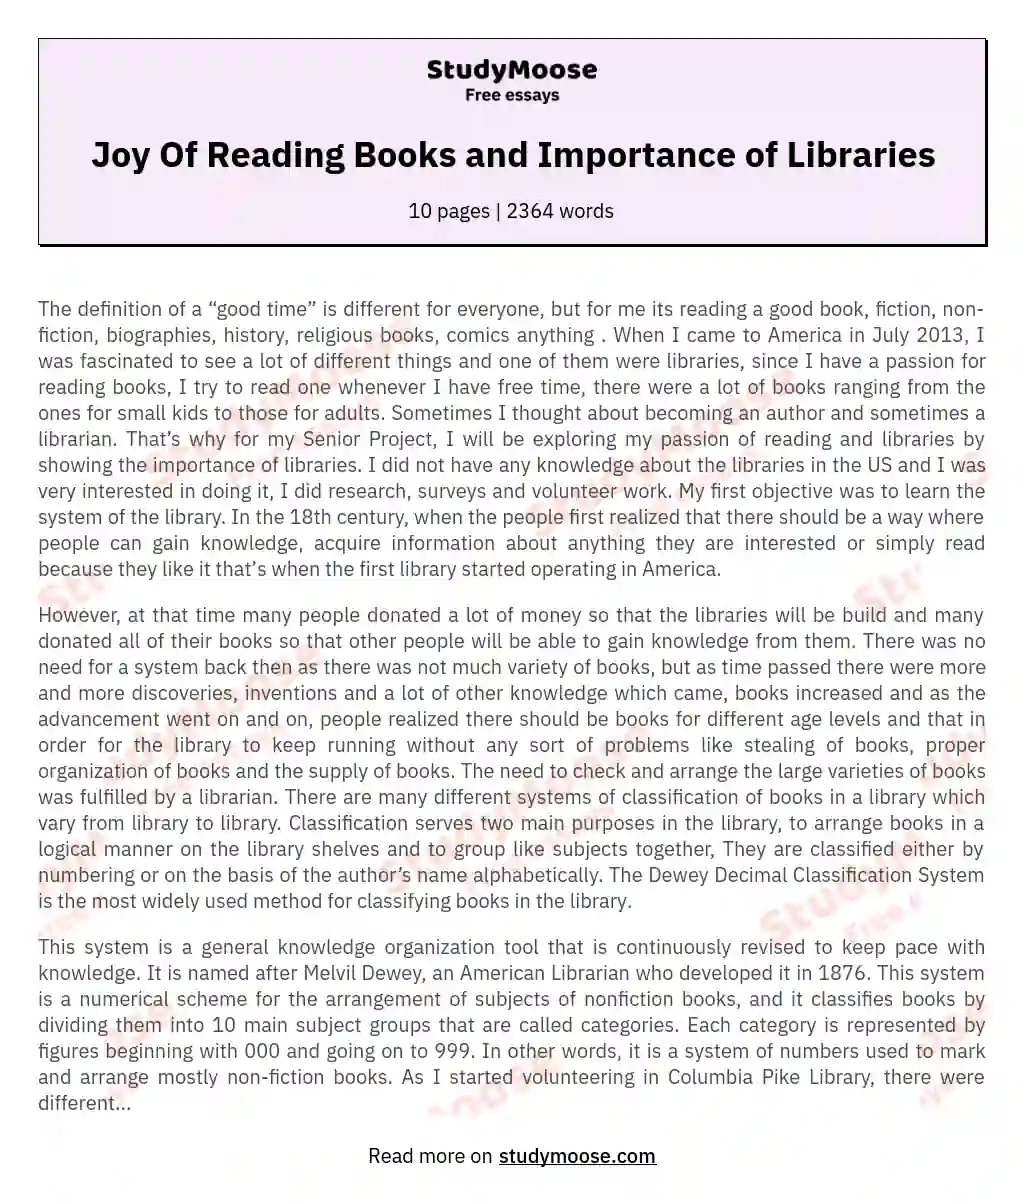 Joy Of Reading Books and Importance of Libraries